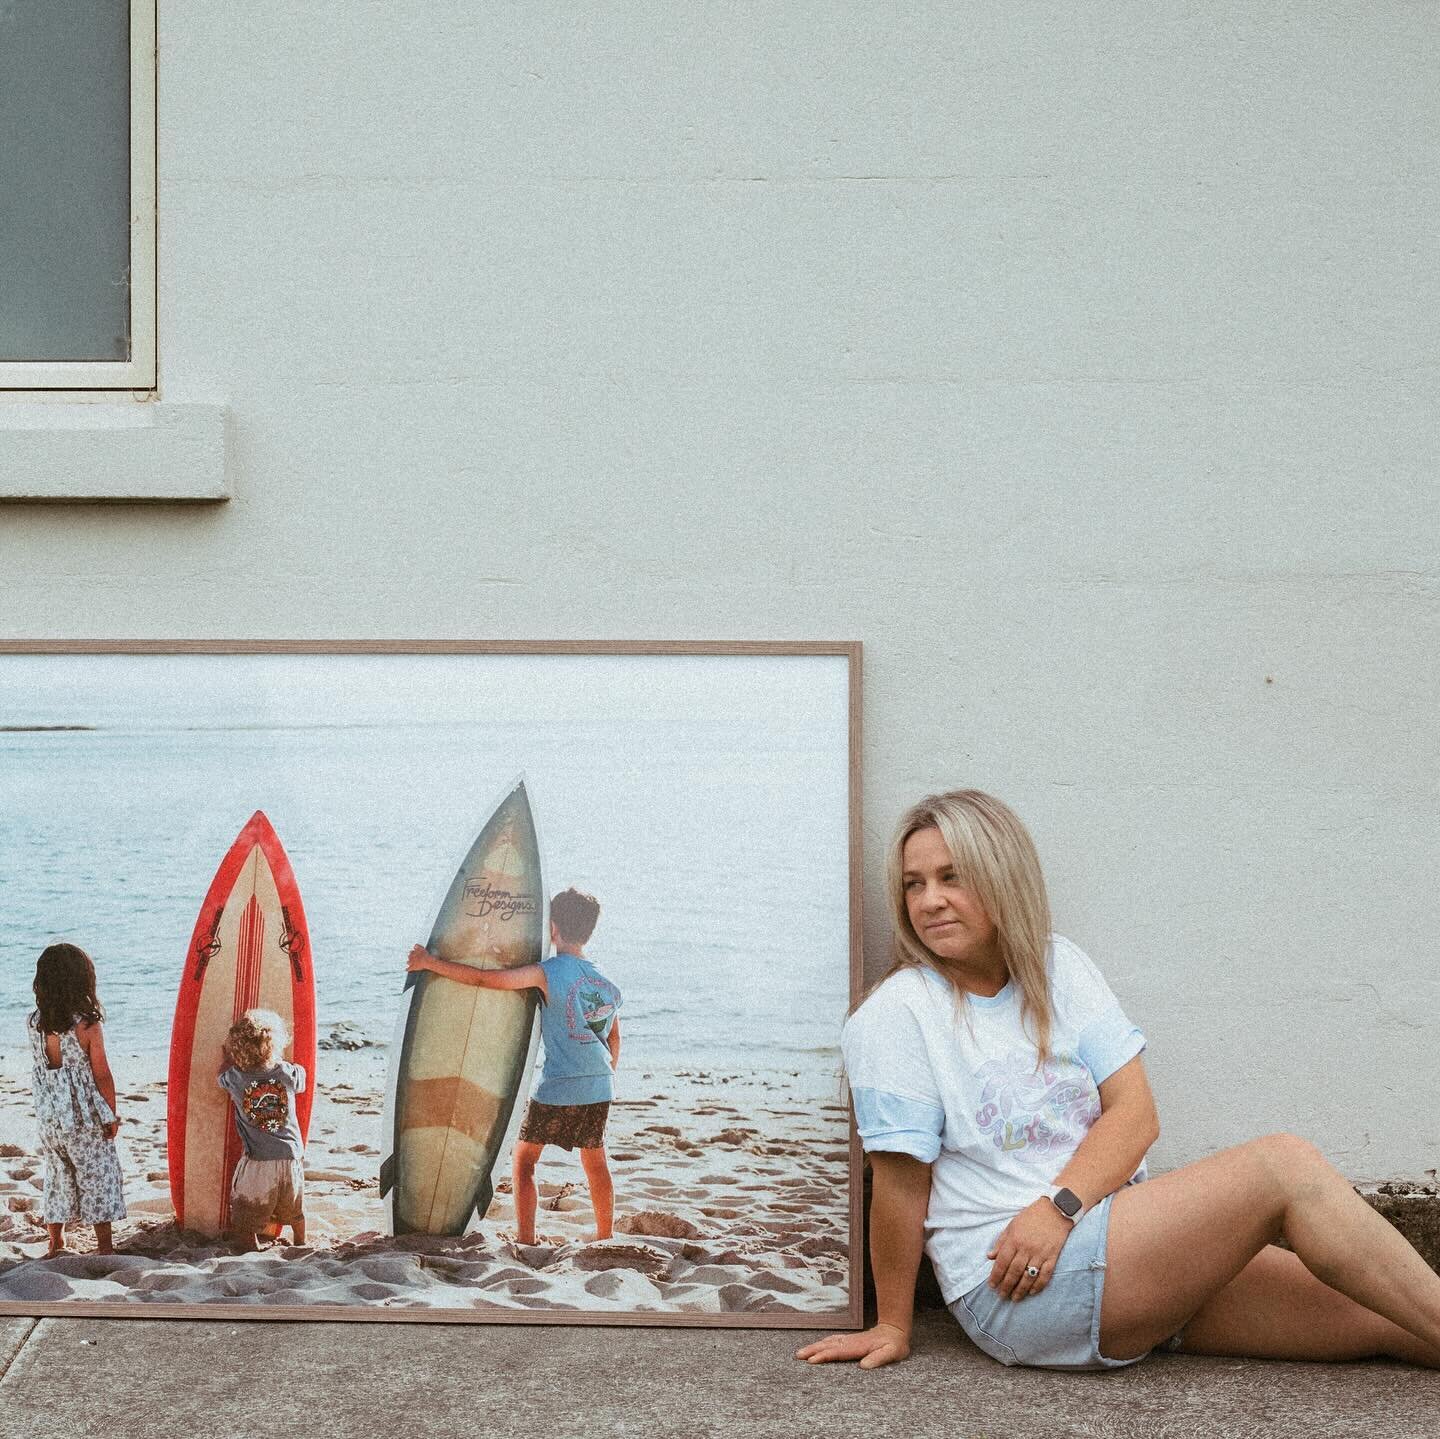 This beautiful fine art print is proudly hanging at @tideespressobar at Port MacDonnell. Three rad grommets and their boards, the offspring of Tide Espresso owners, Ash + Jenna 🏄🏼&zwj;♀️ 

I shot this on 35mm film and had it enlarged huuuuge at 102